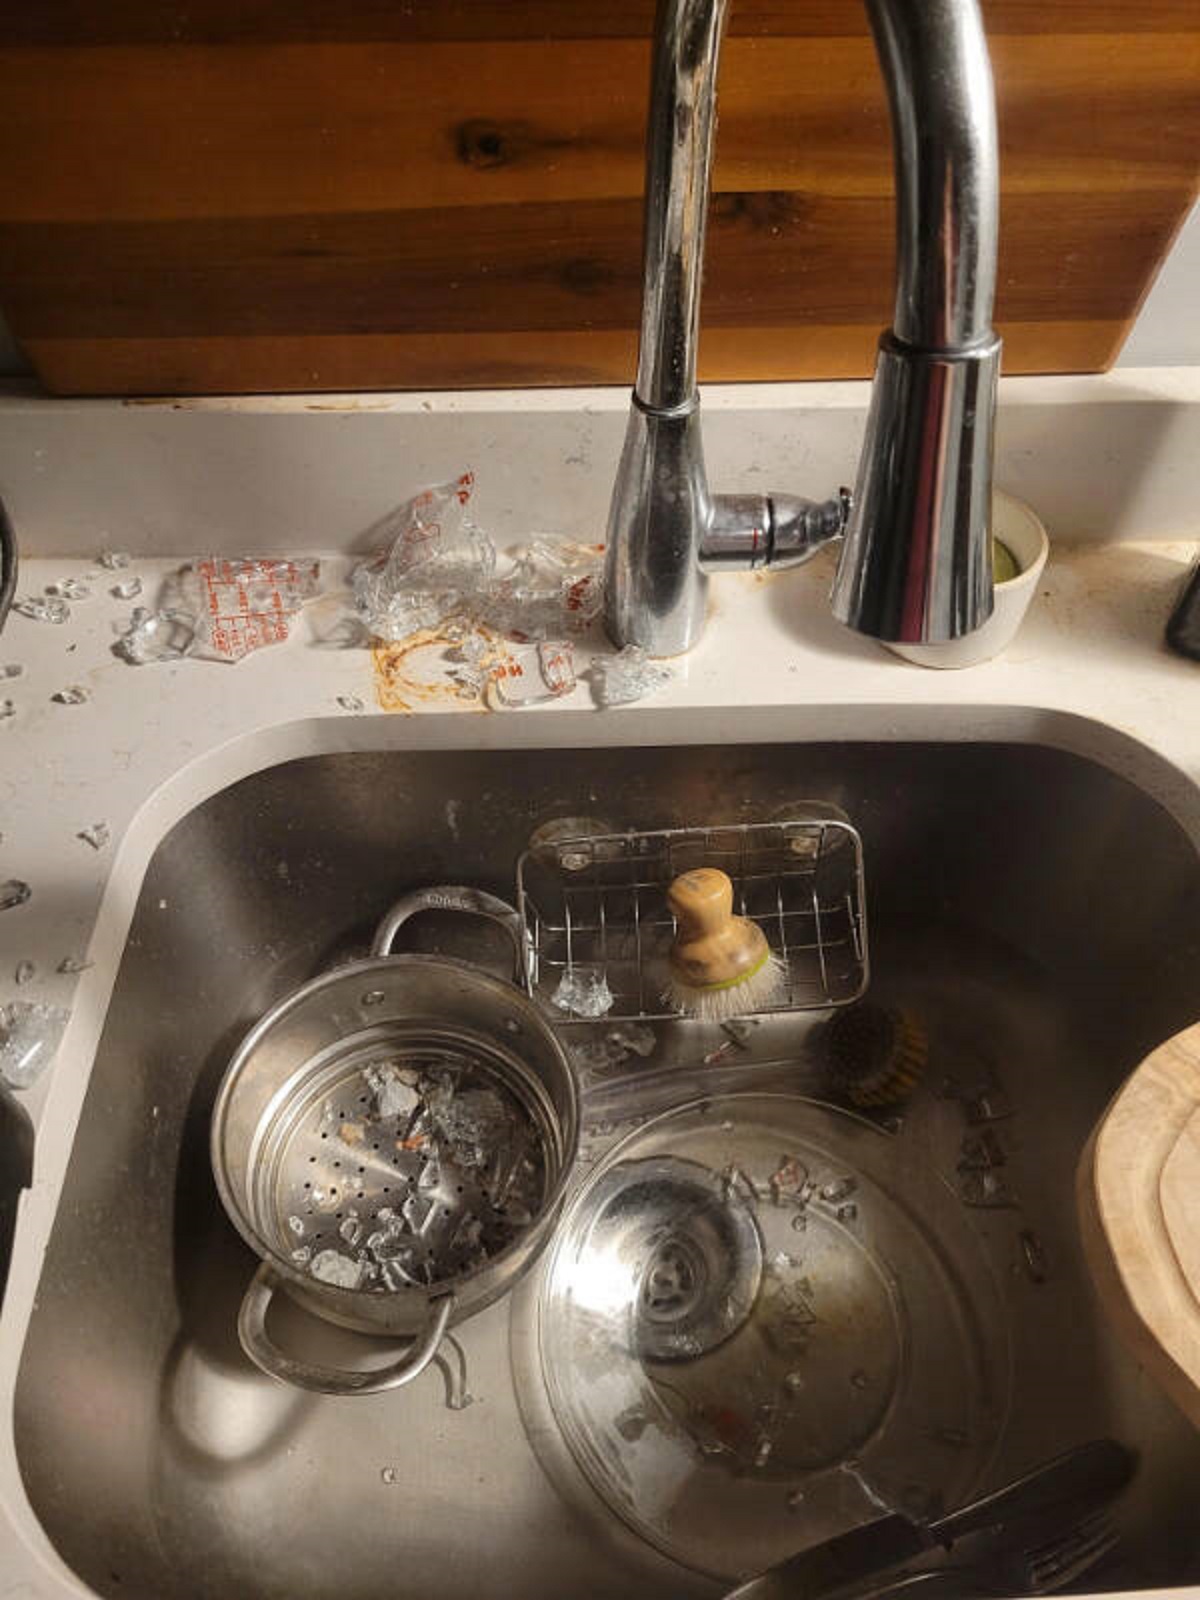 “Startled awake at 3am by a violent shattering sound, found that my measuring cup spontaneously exploded”